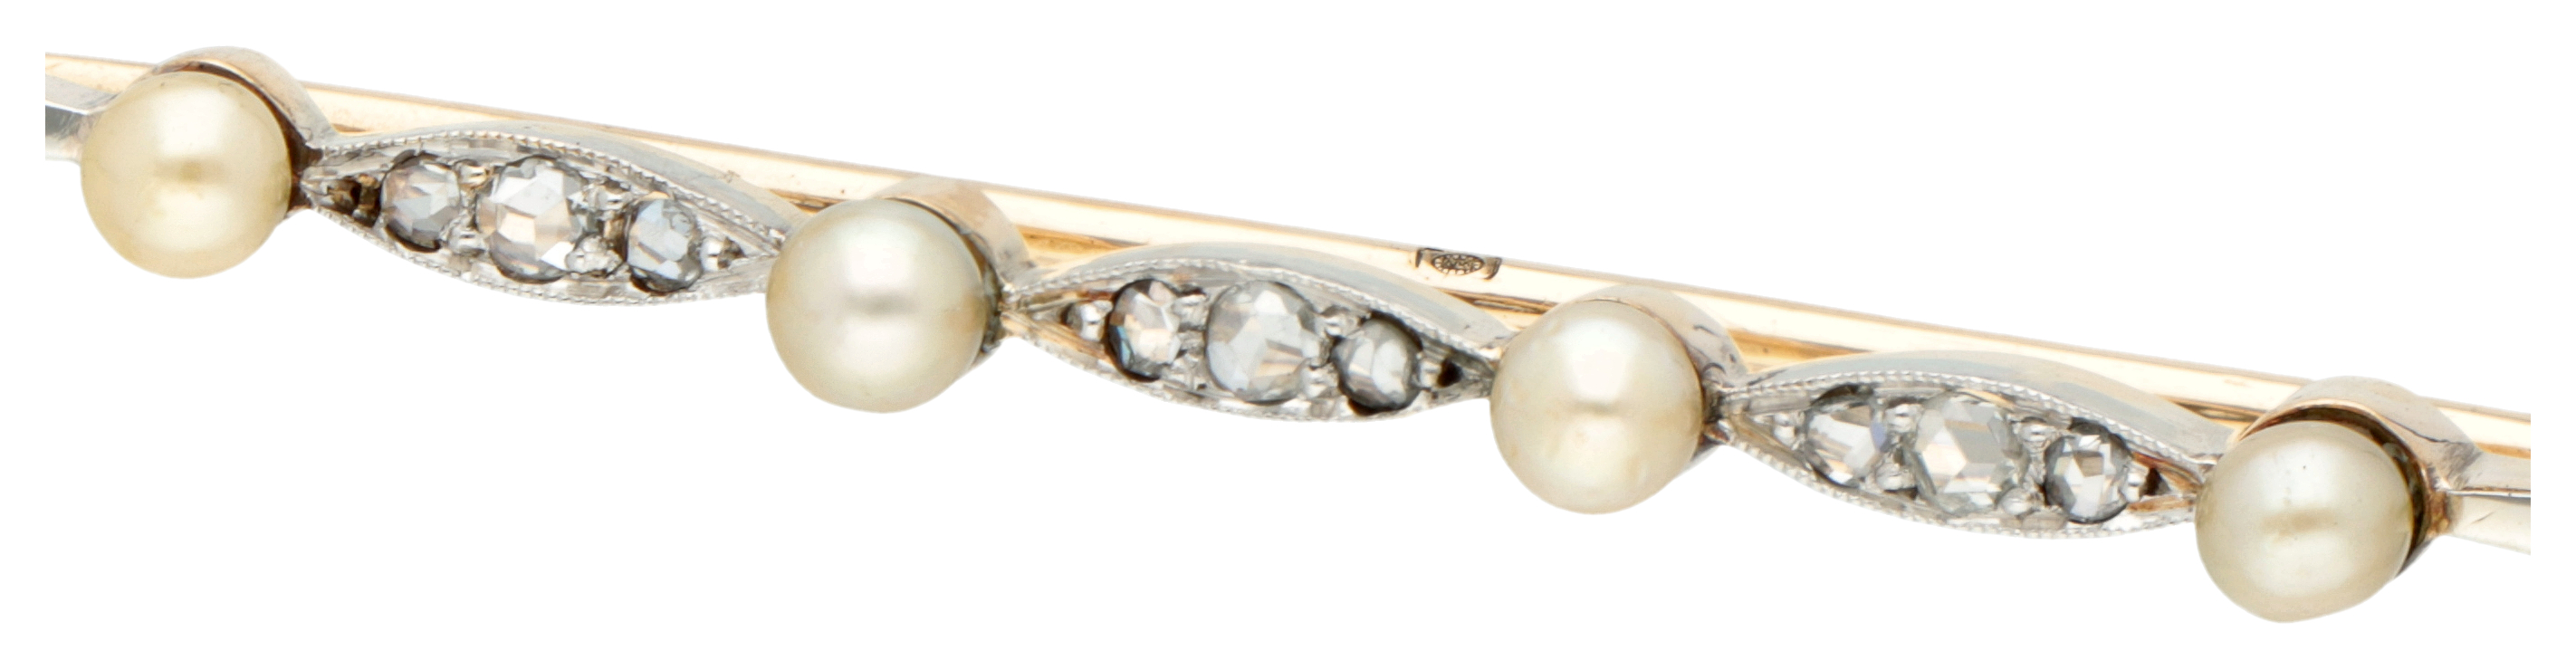 14K. Yellow gold barette brooch with diamond and pearl. - Image 2 of 3